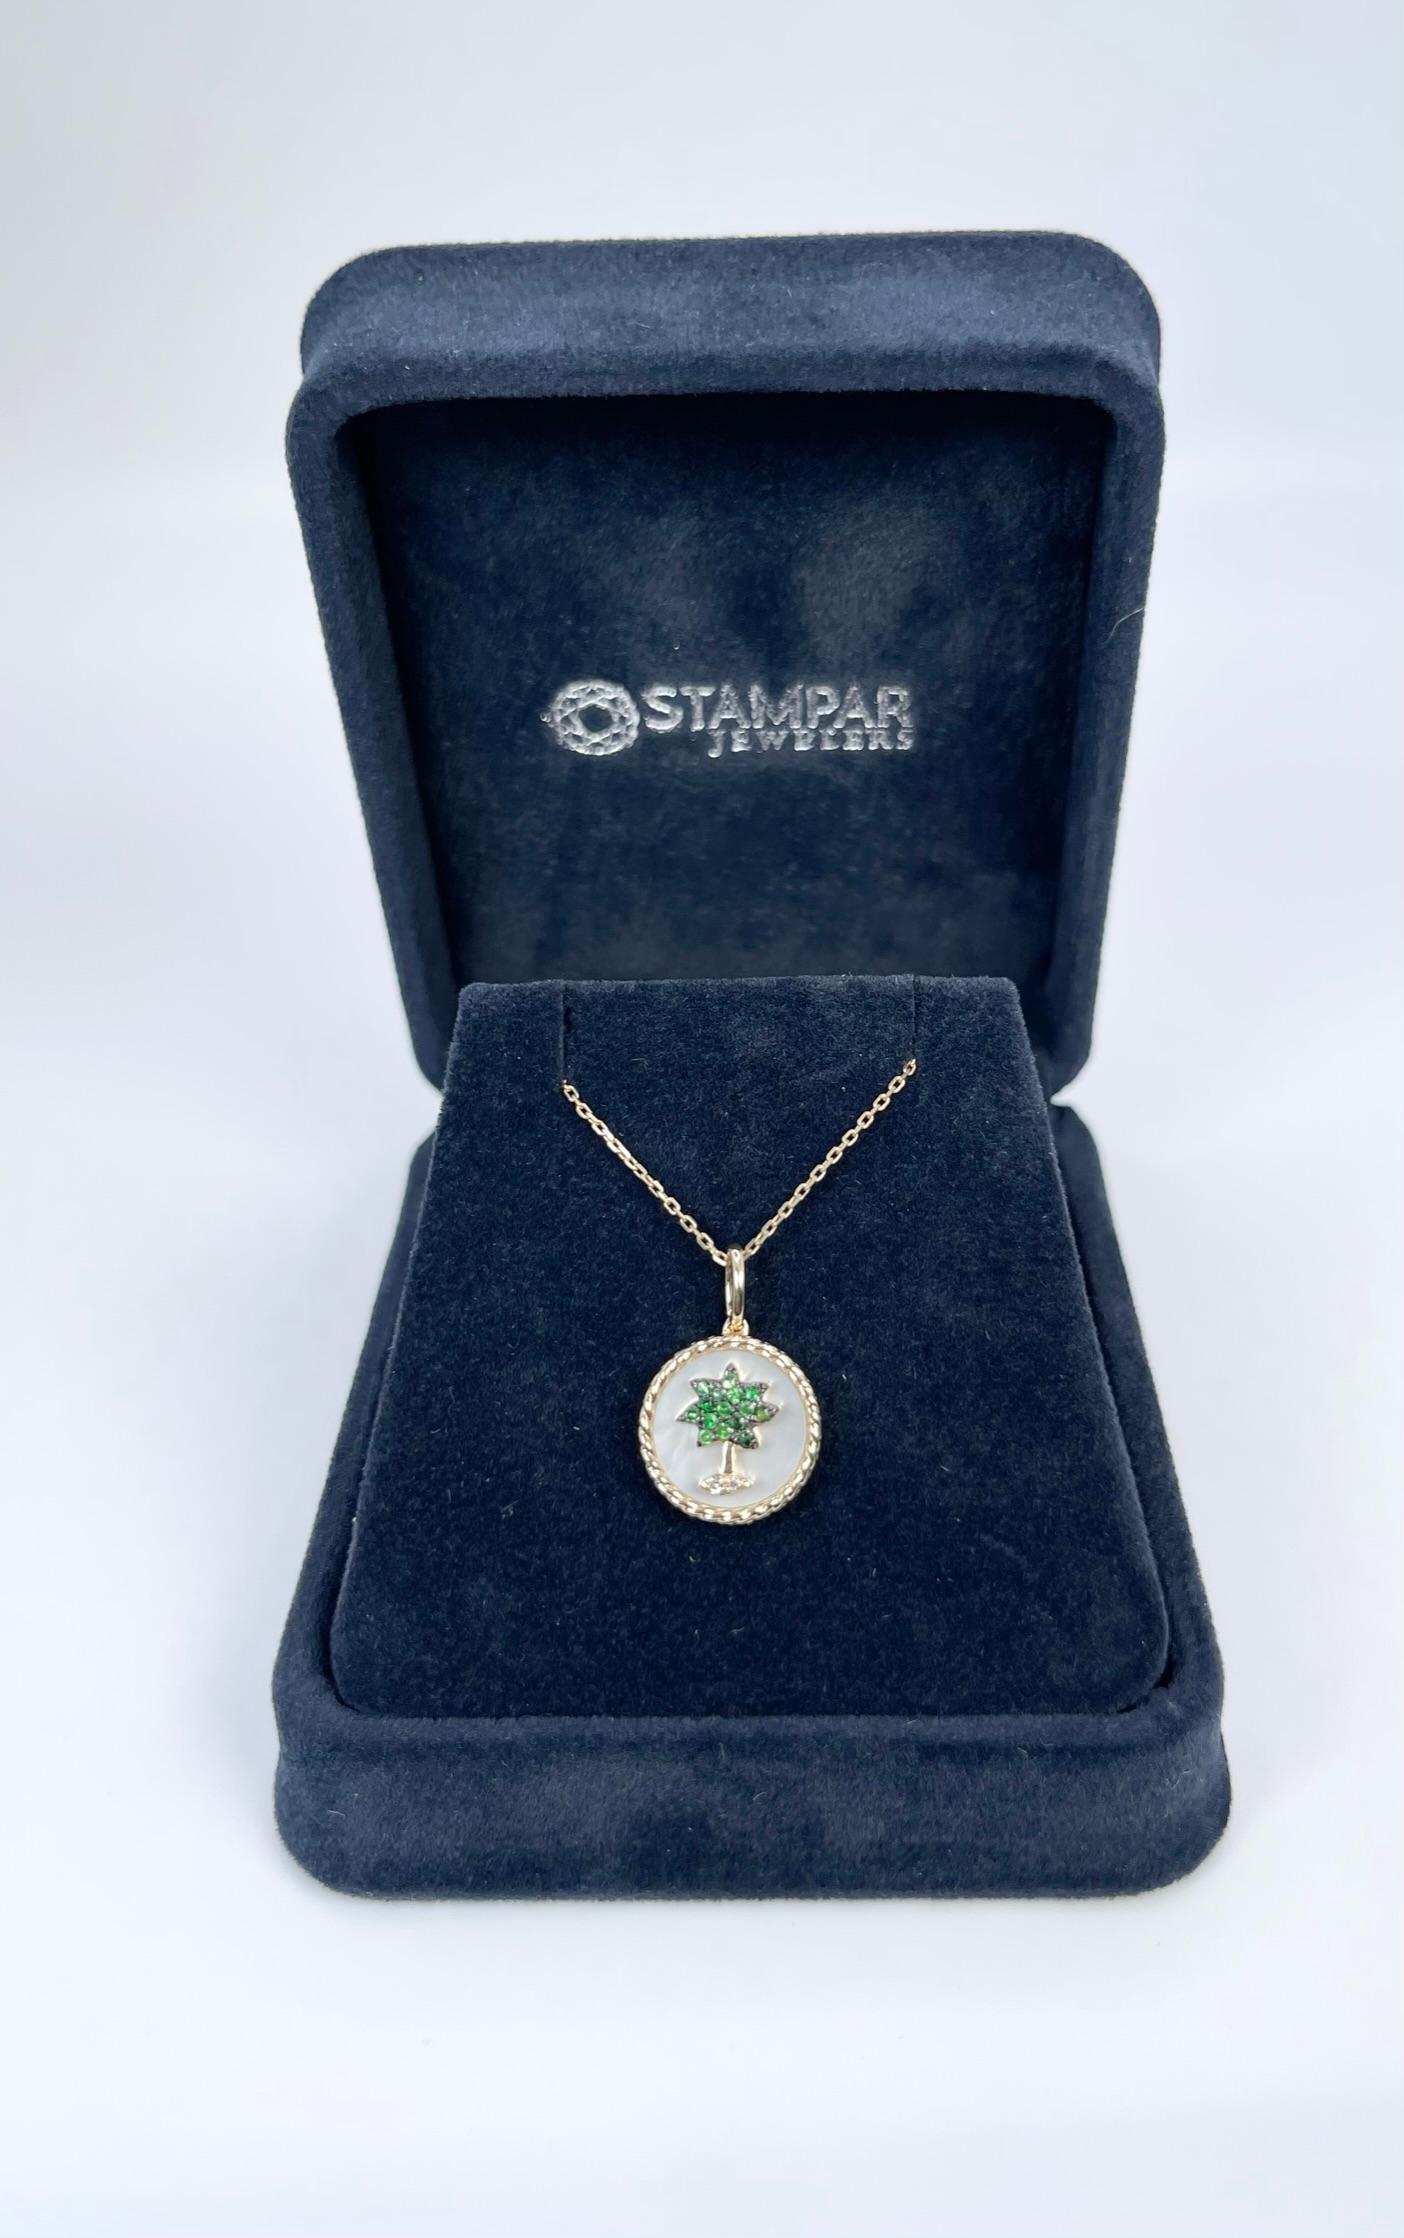 Stunning mother of pearl palm tree pendant necklace in 14KT yellow gold! Great craftmanship and feel to the pendant!

GRAM WEIGHT: 3.40gr
GOLD: 14KT yellow gold
SIZE: PENDANT (0.75